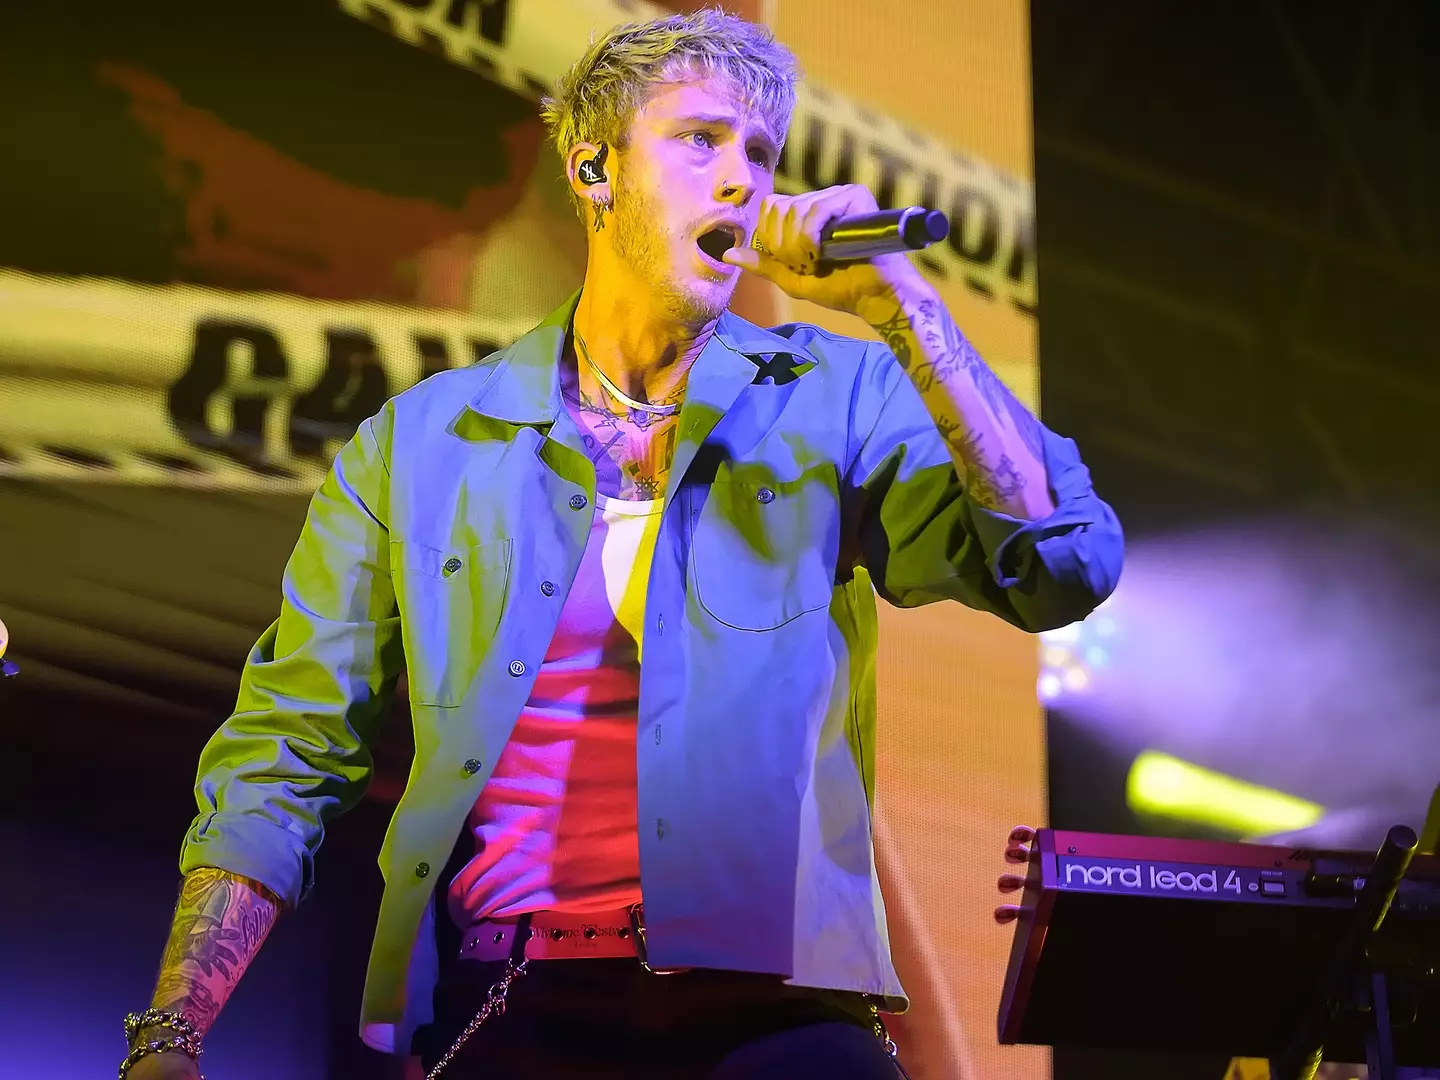 Machine Gun Kelly was groped by a fan during his concert in Portland, Oregon.